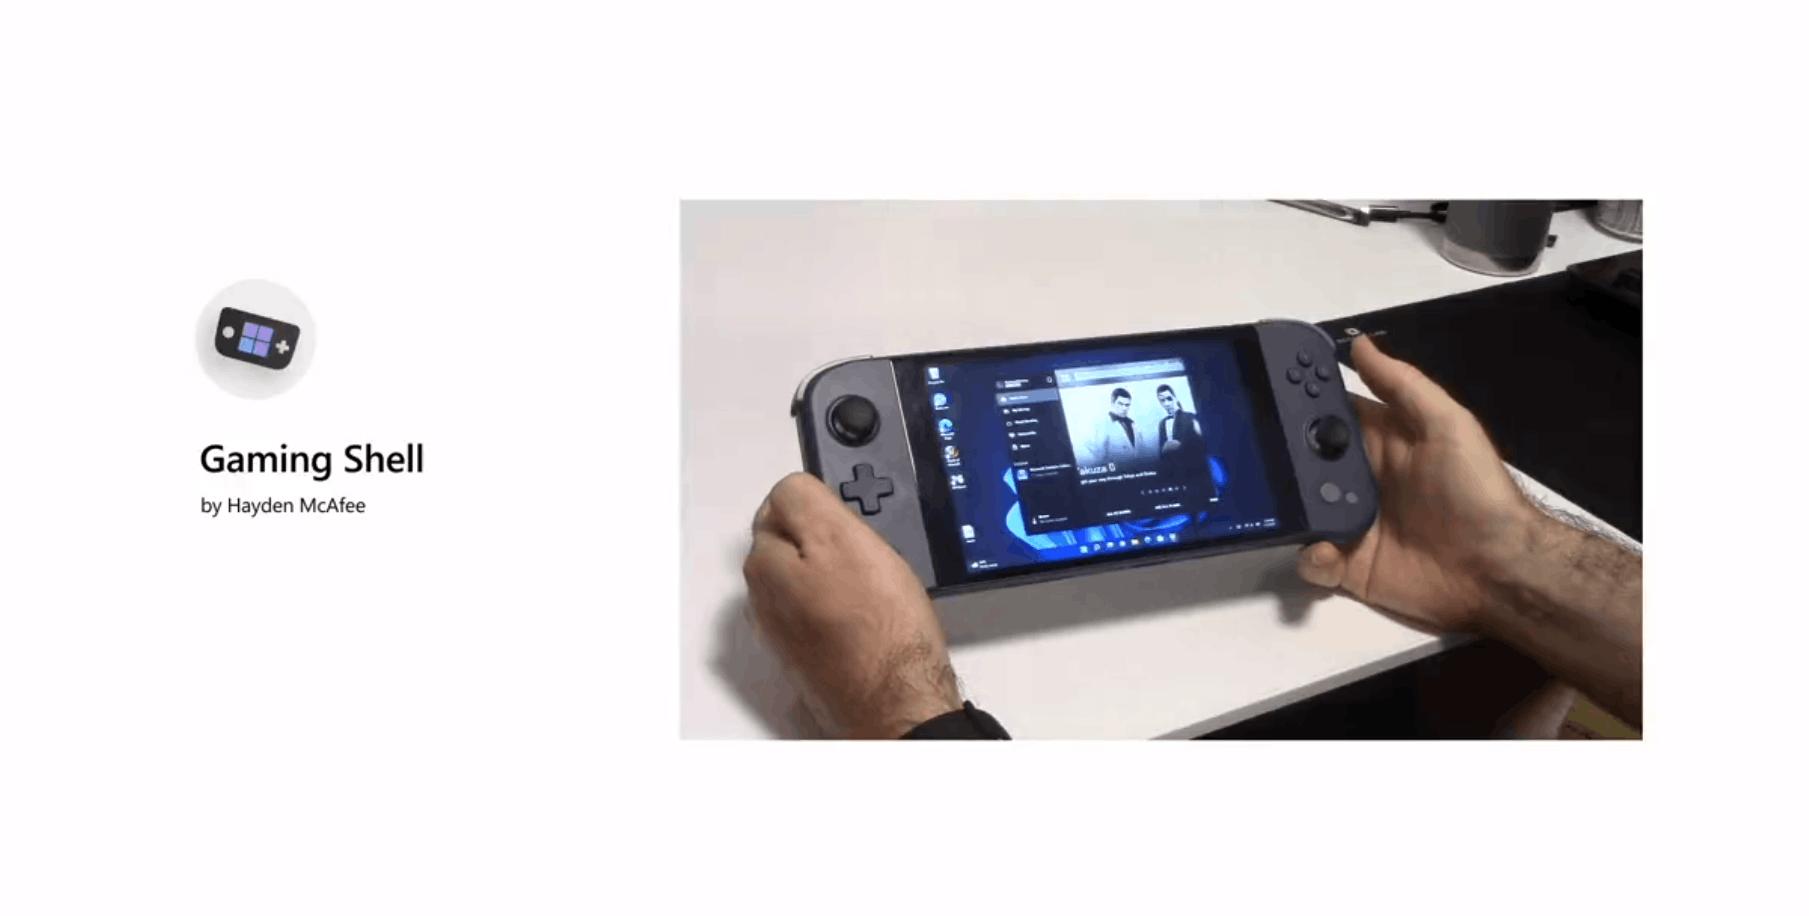 Windows Handheld Mode For Portable Consoles 03